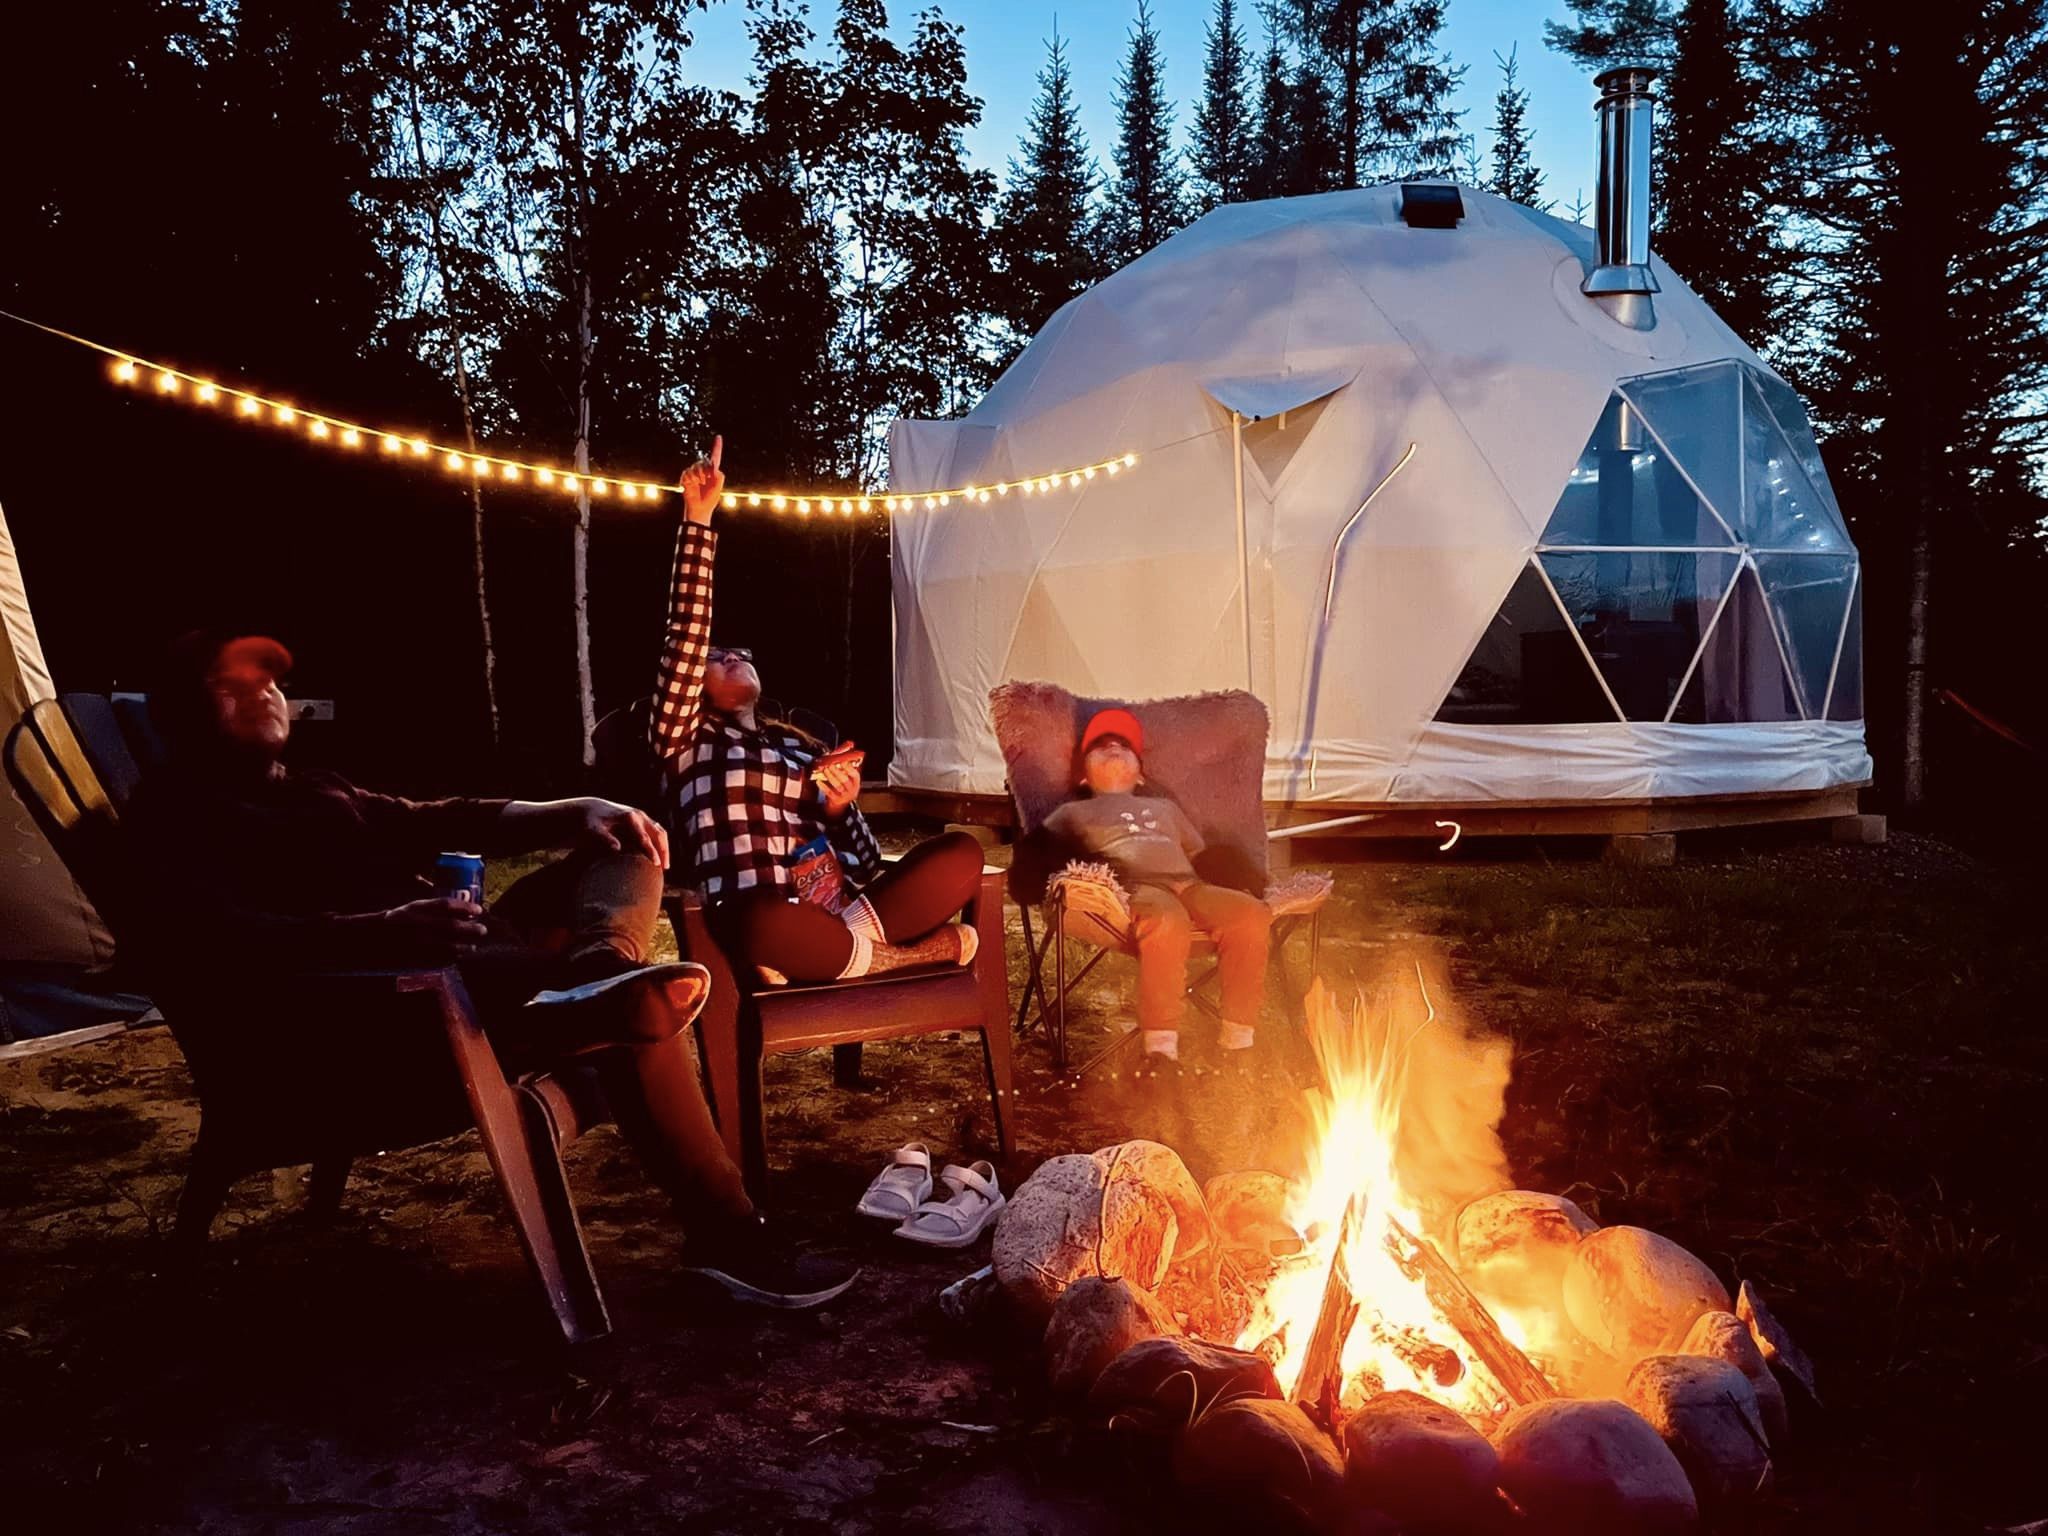 A family sits by a campfire in front of a small geodesic dome. All are looking up and one person is pointing at the stars.